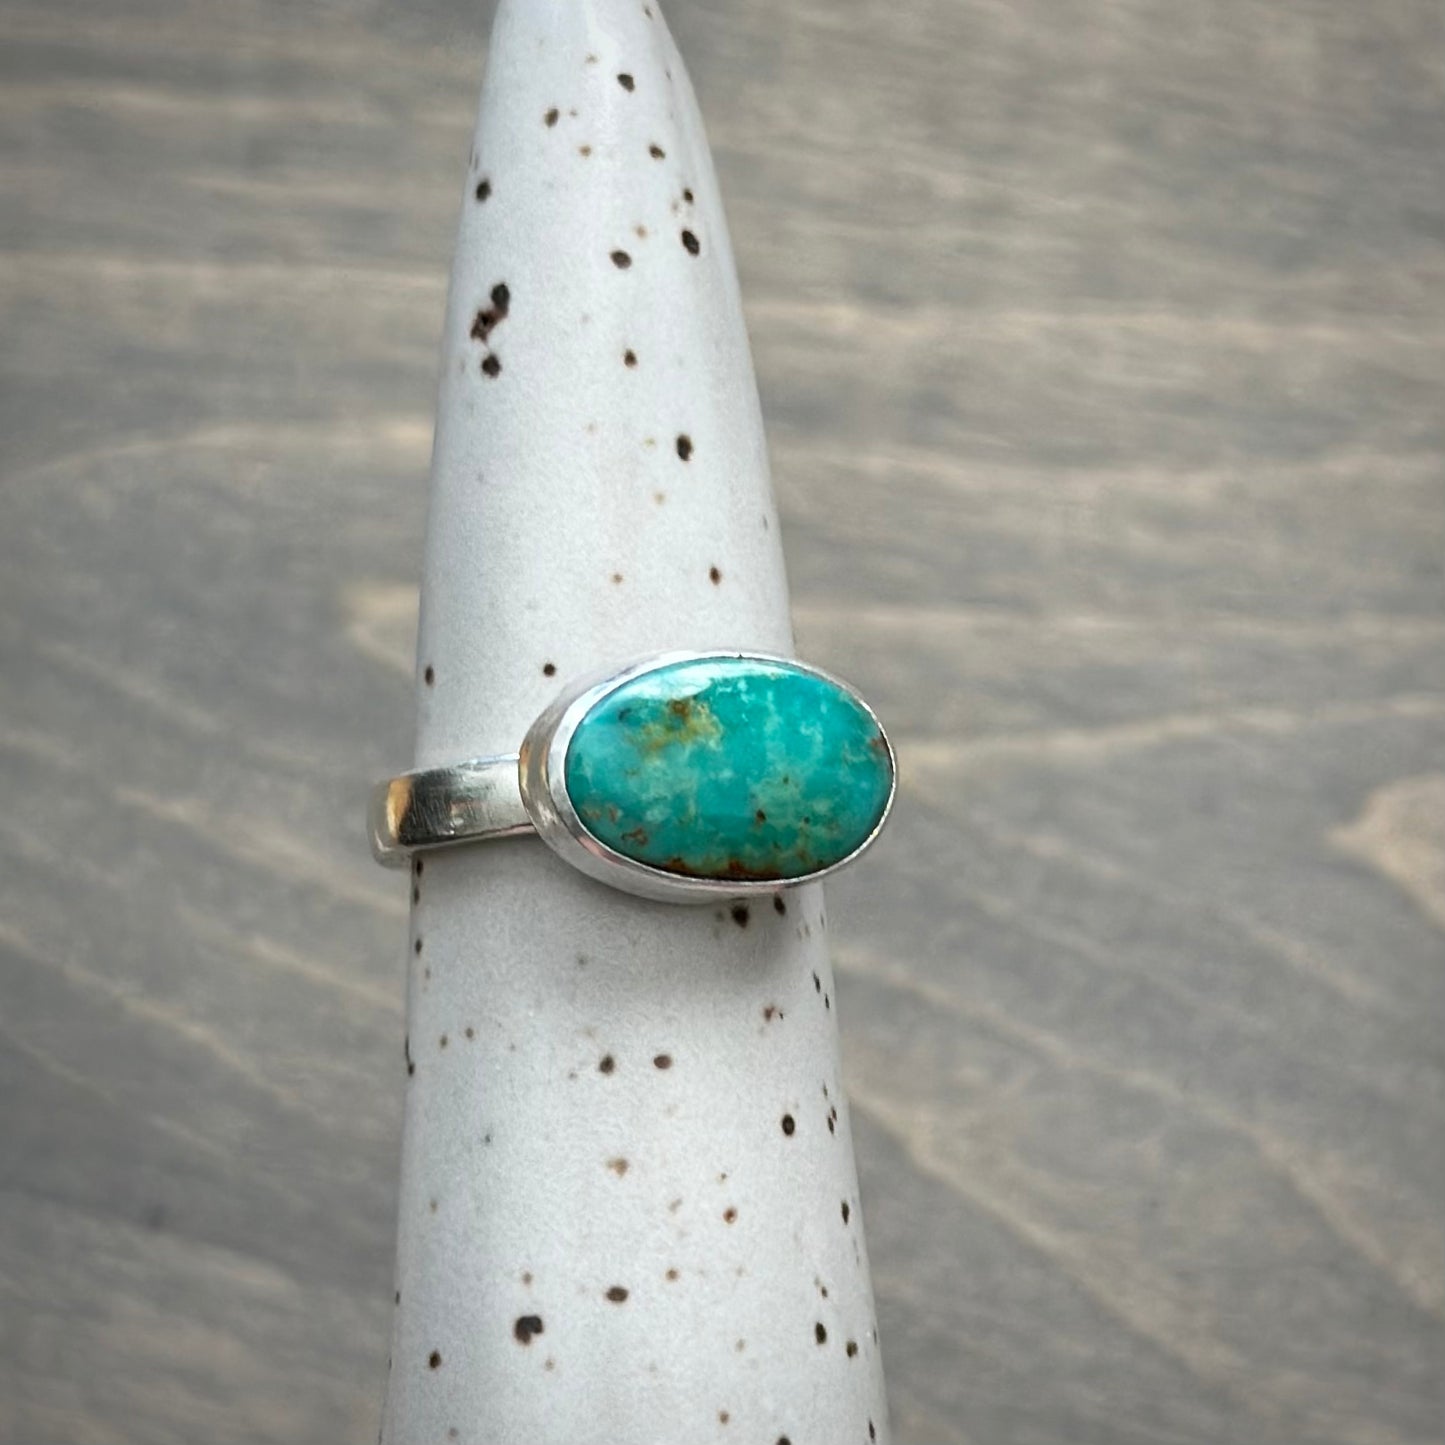 Evans Turquoise Ring in size 6-1/4